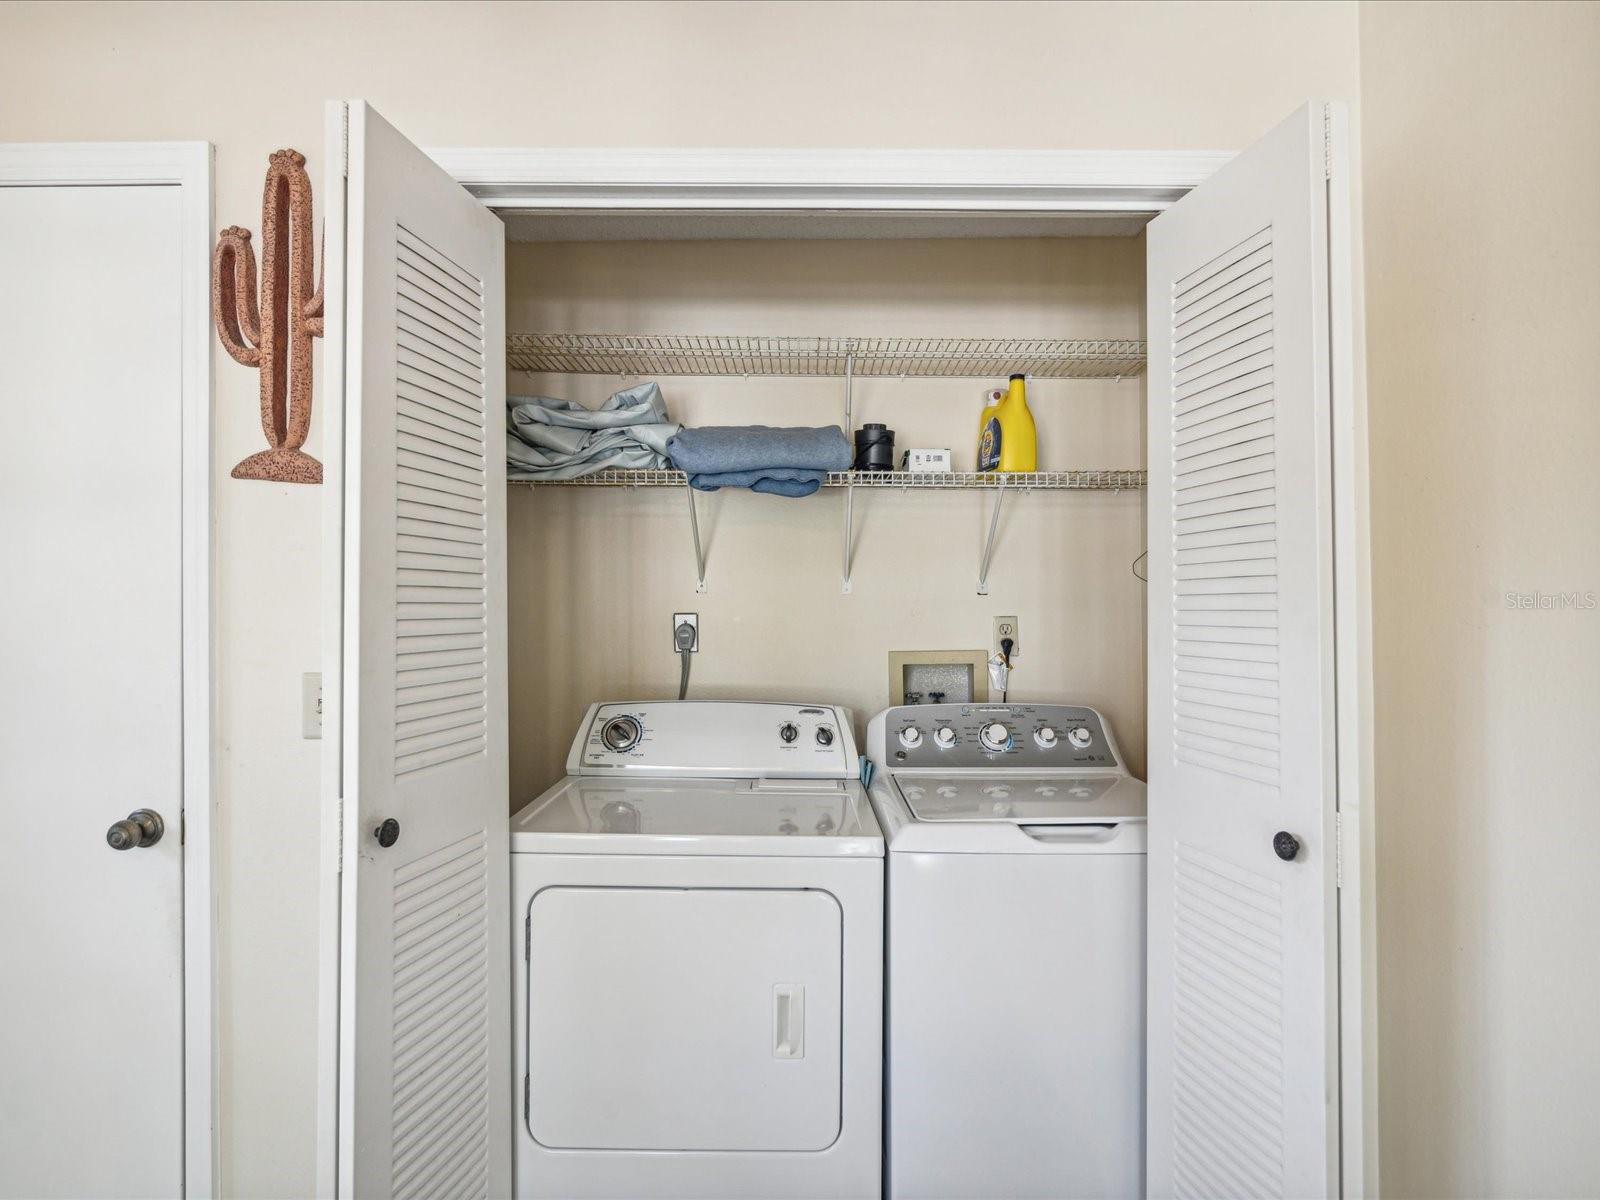 Washer and Dryer in Closet